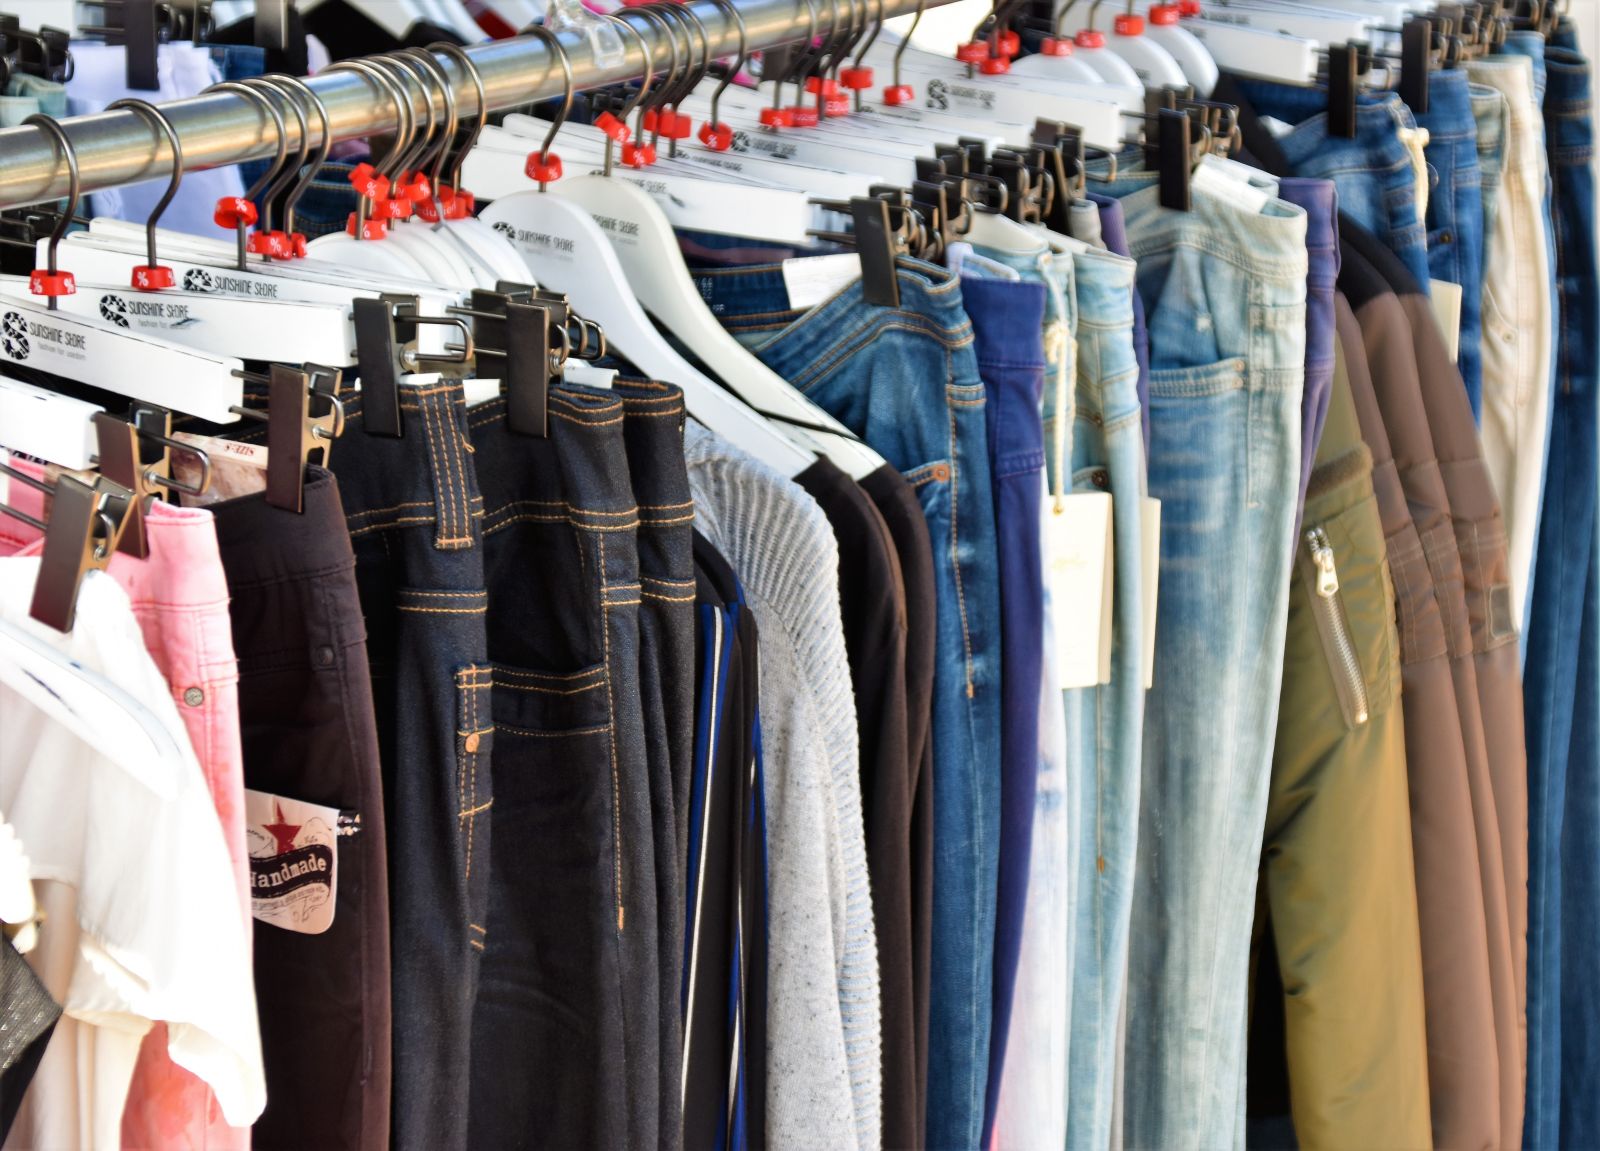 Consumer Products - Discount Clothing Store Racks